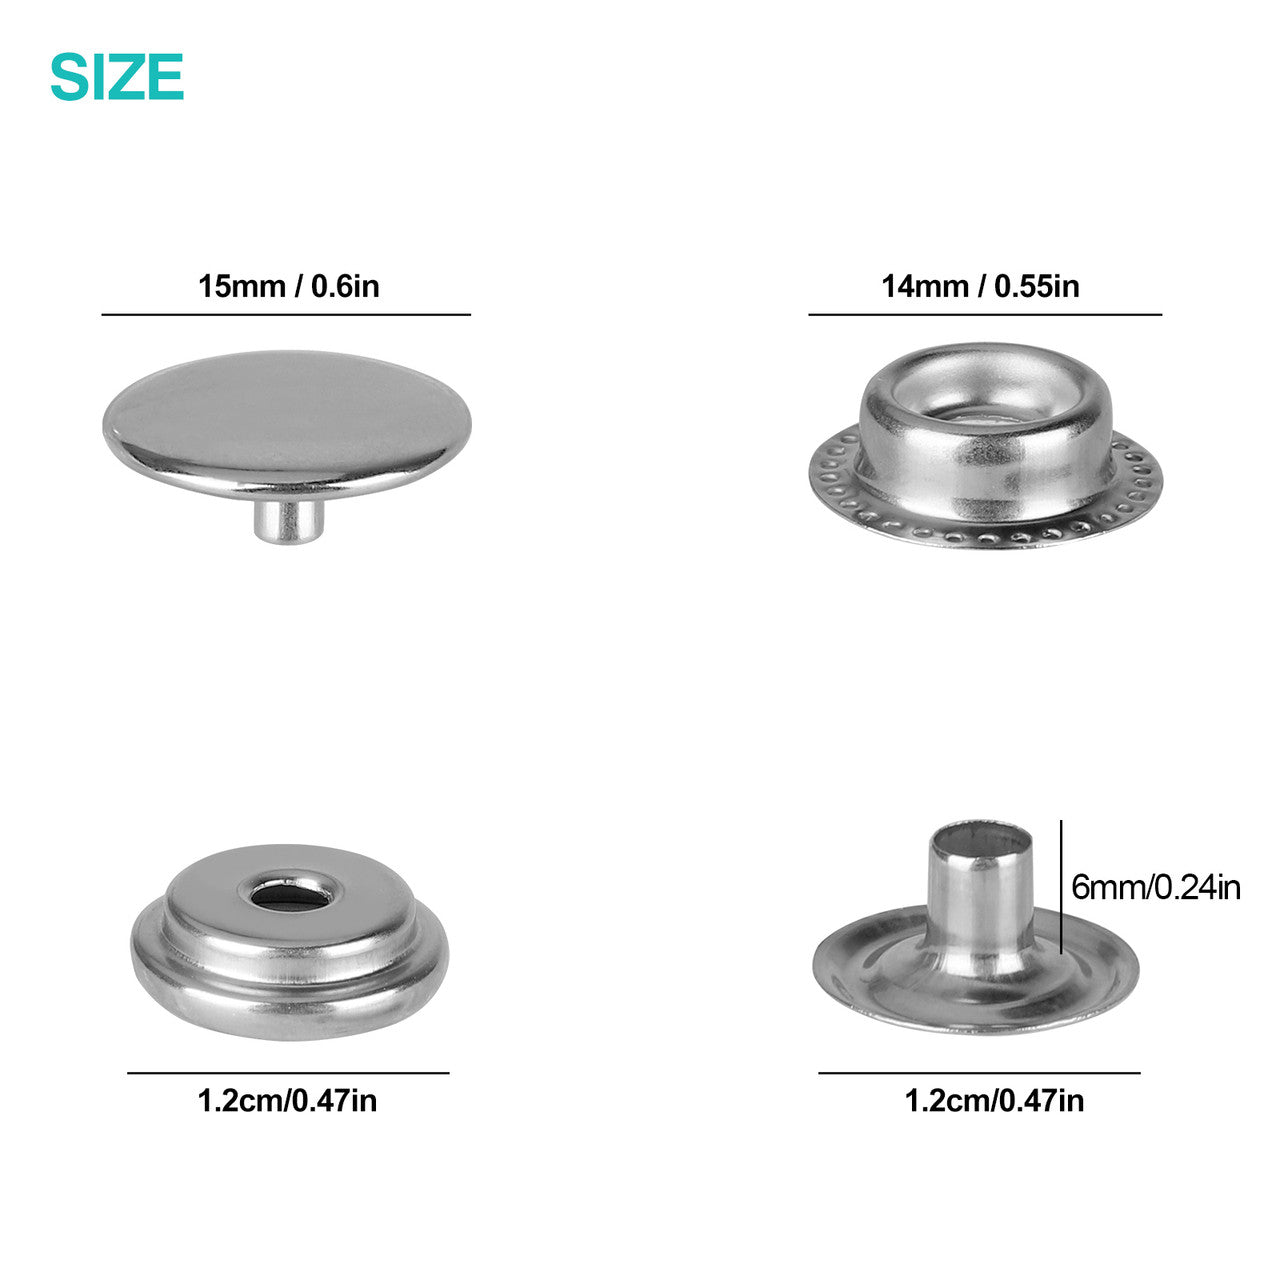 Stainless Steel Fastener Set Cap Diameter 15mm, Snap Press Stud Cap Button Kit for Marine Boat Canvas Jackets Bags Leather Craft Sewing (4 Components, 25 Pcs for Each), 100Pcs